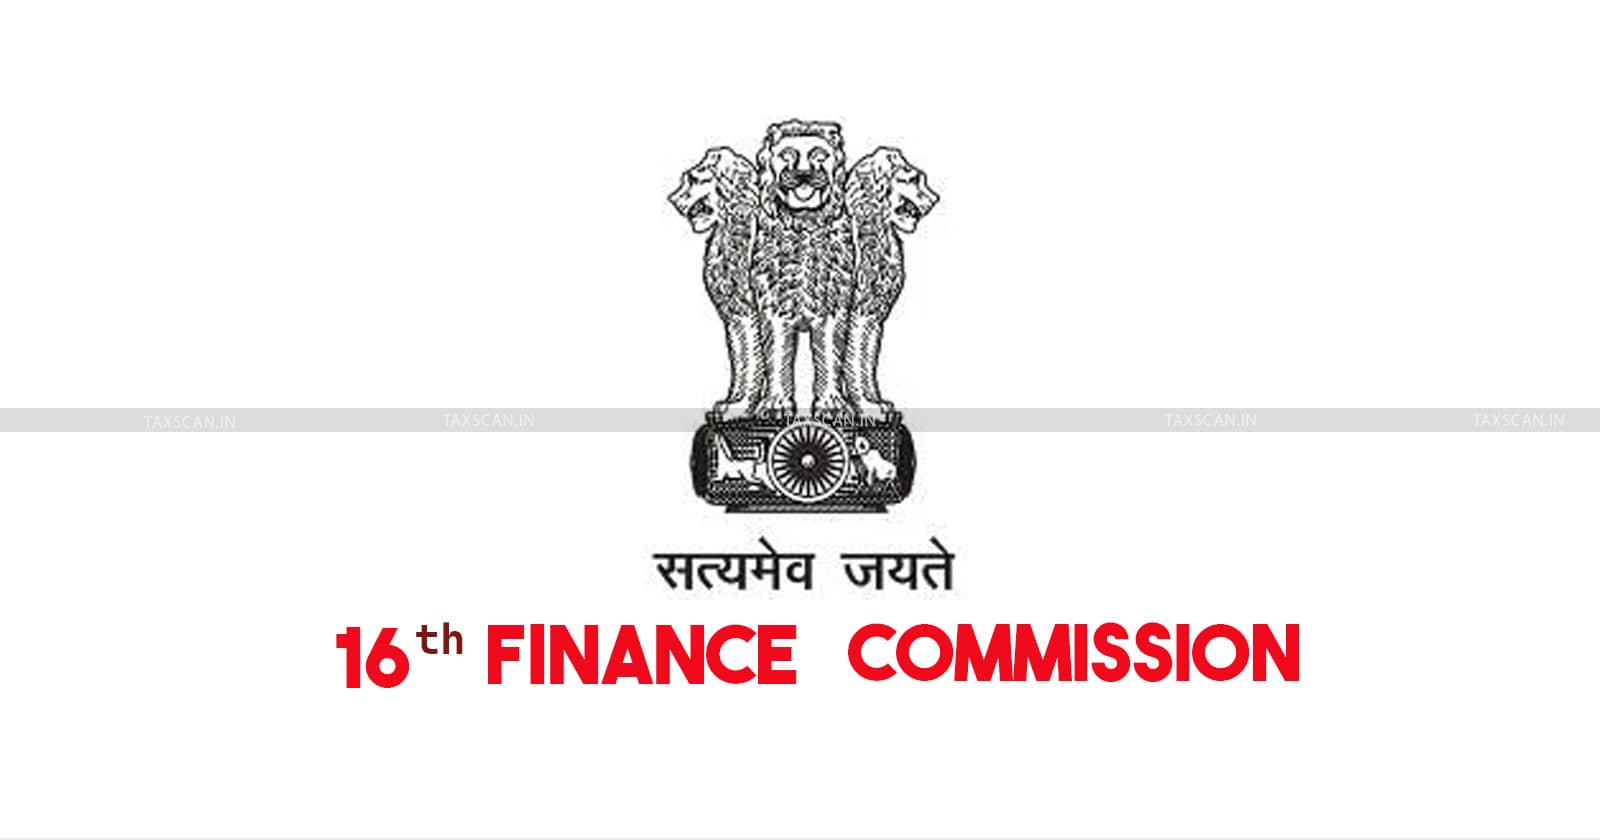 Sixteenth Finance Commission invites suggestions on issues related to its terms of reference